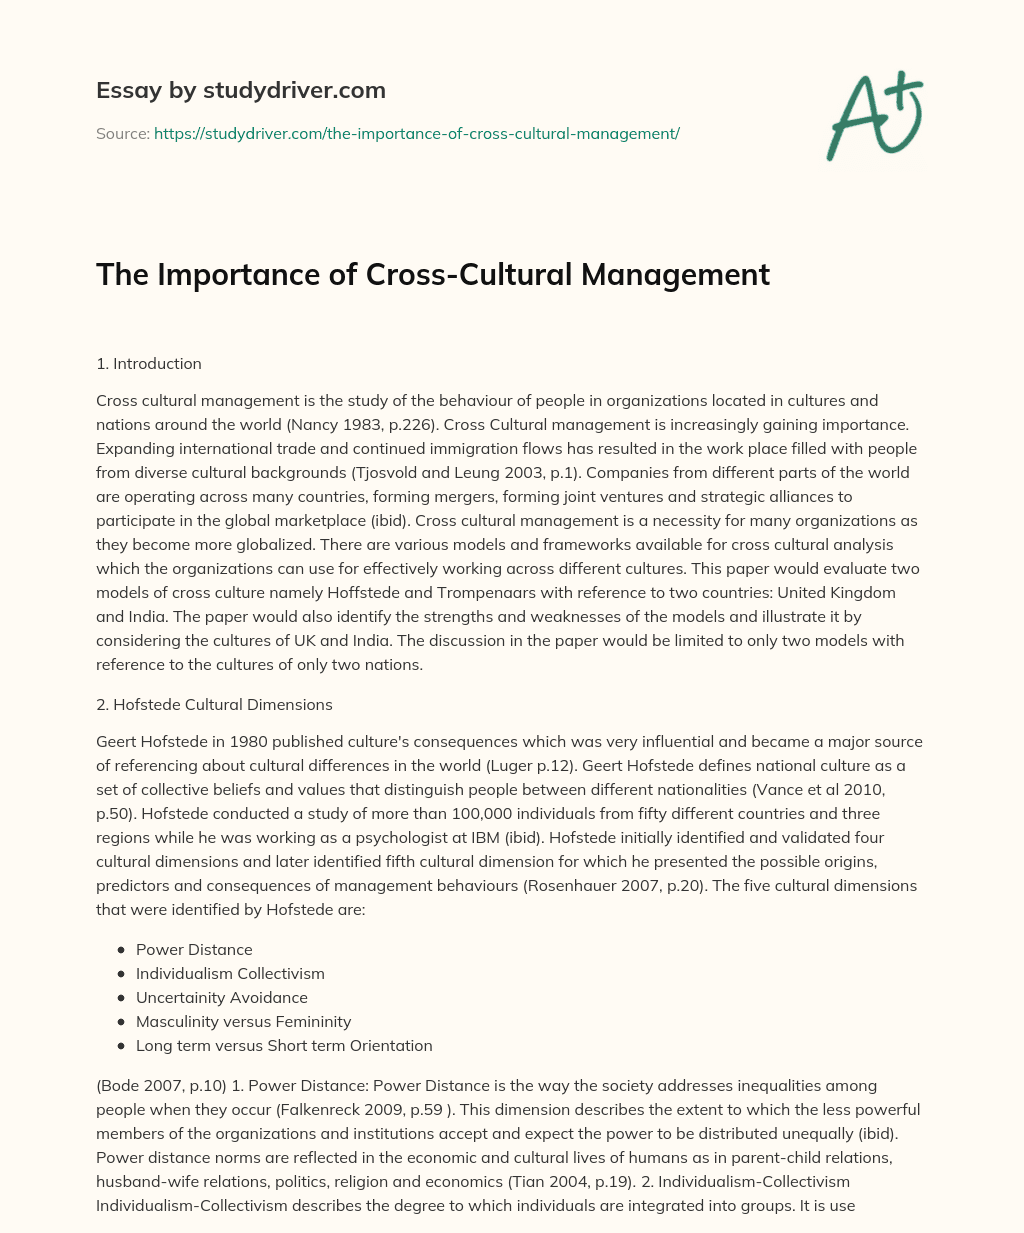 The Importance of Cross-Cultural Management essay